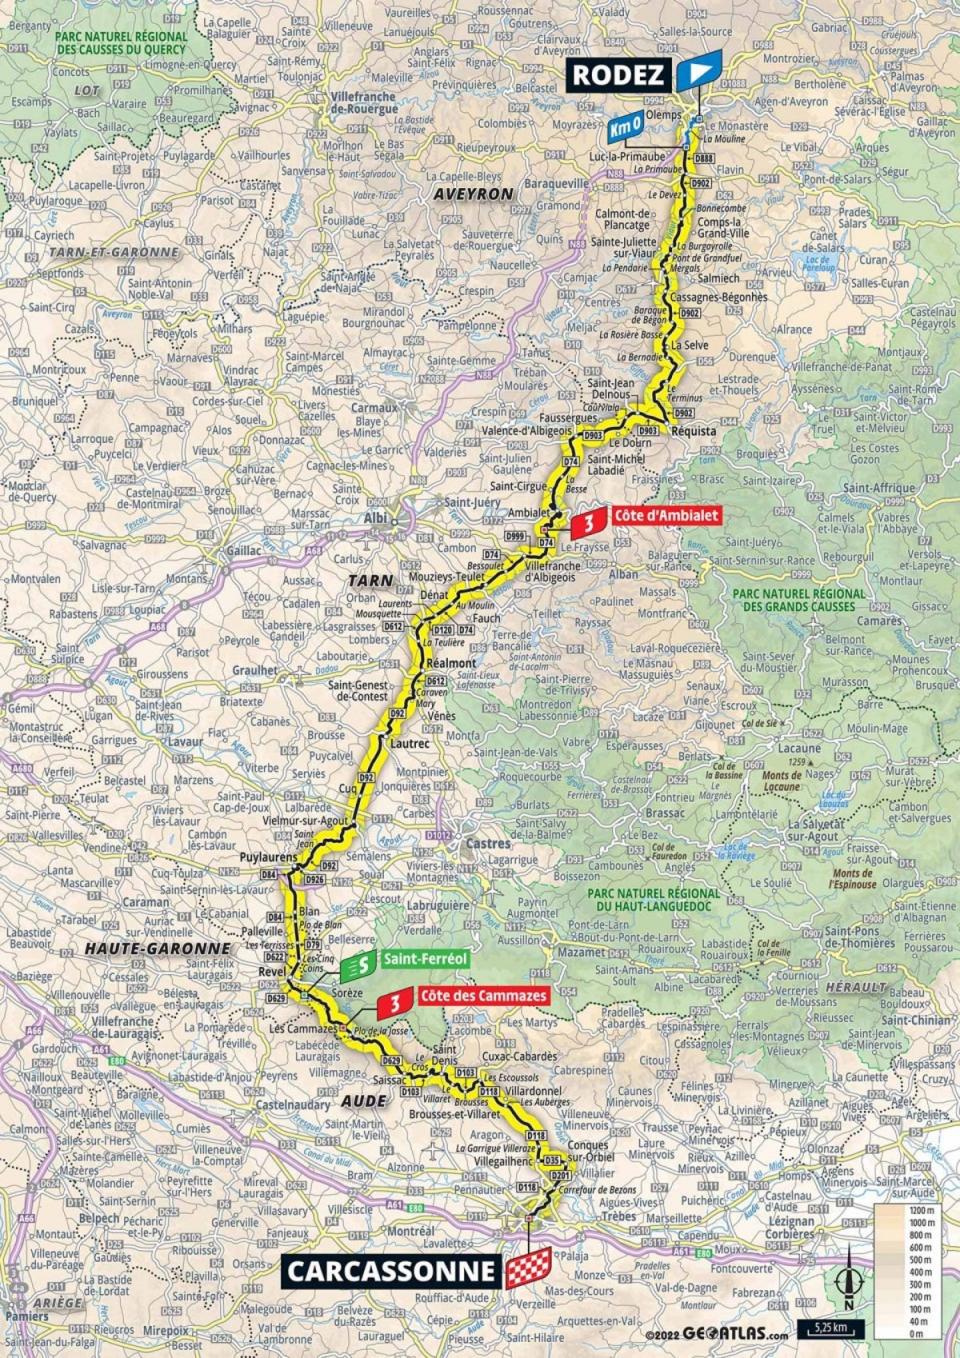 Stage 15 map (letour)